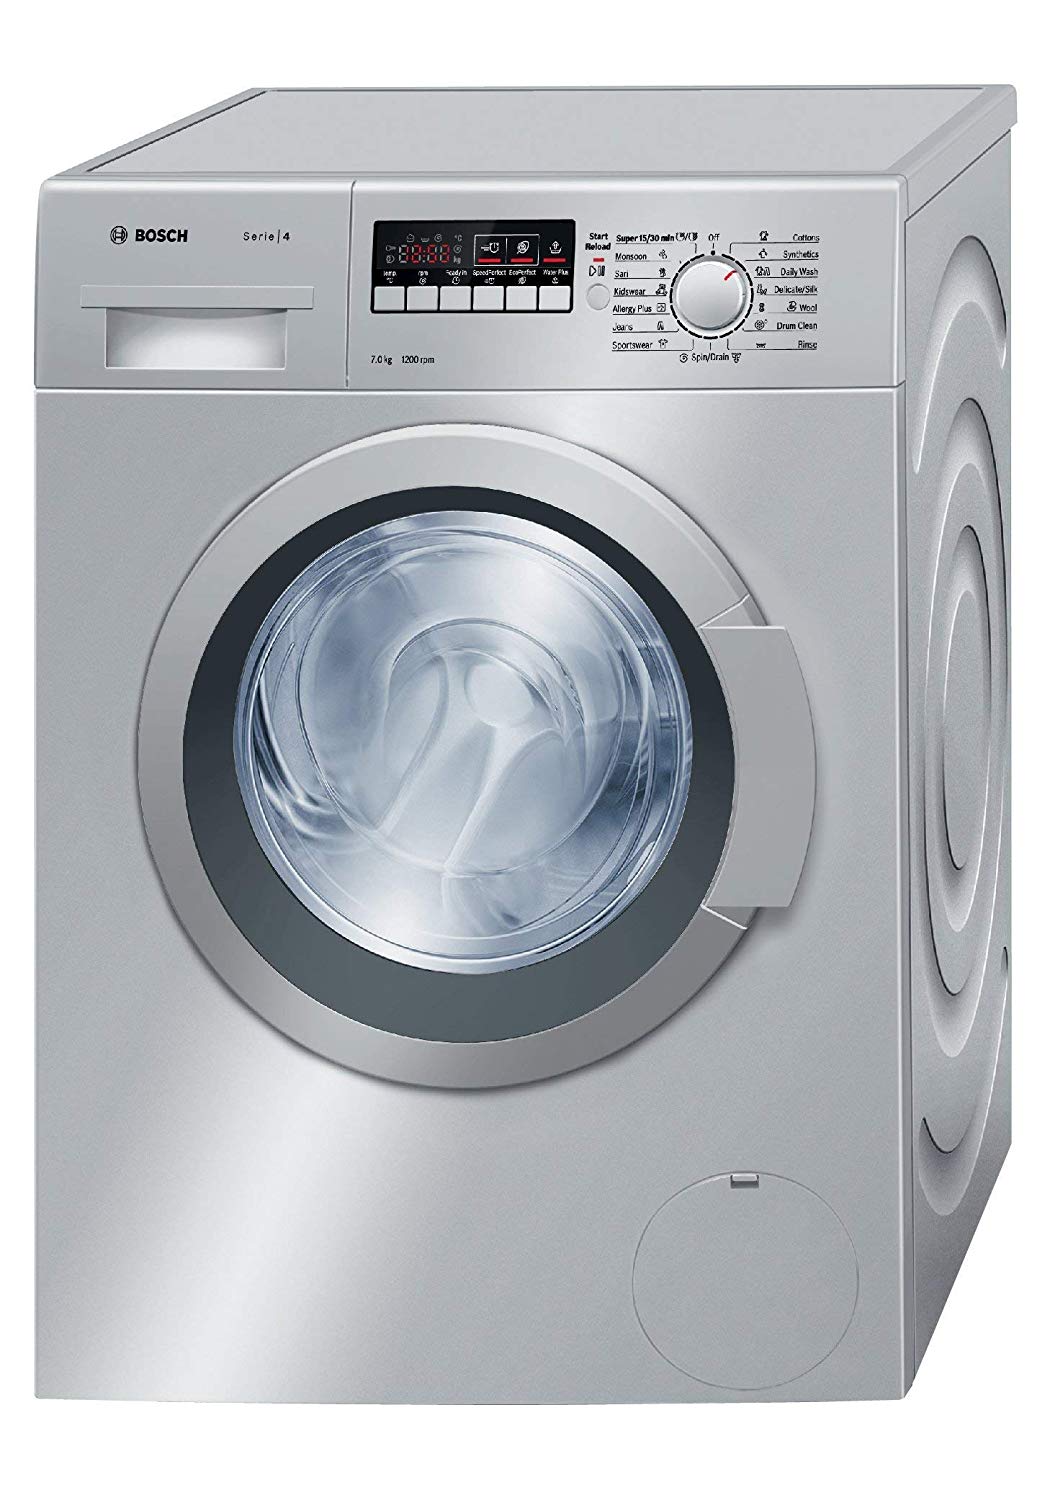 Best Washing Machines in India in 2020